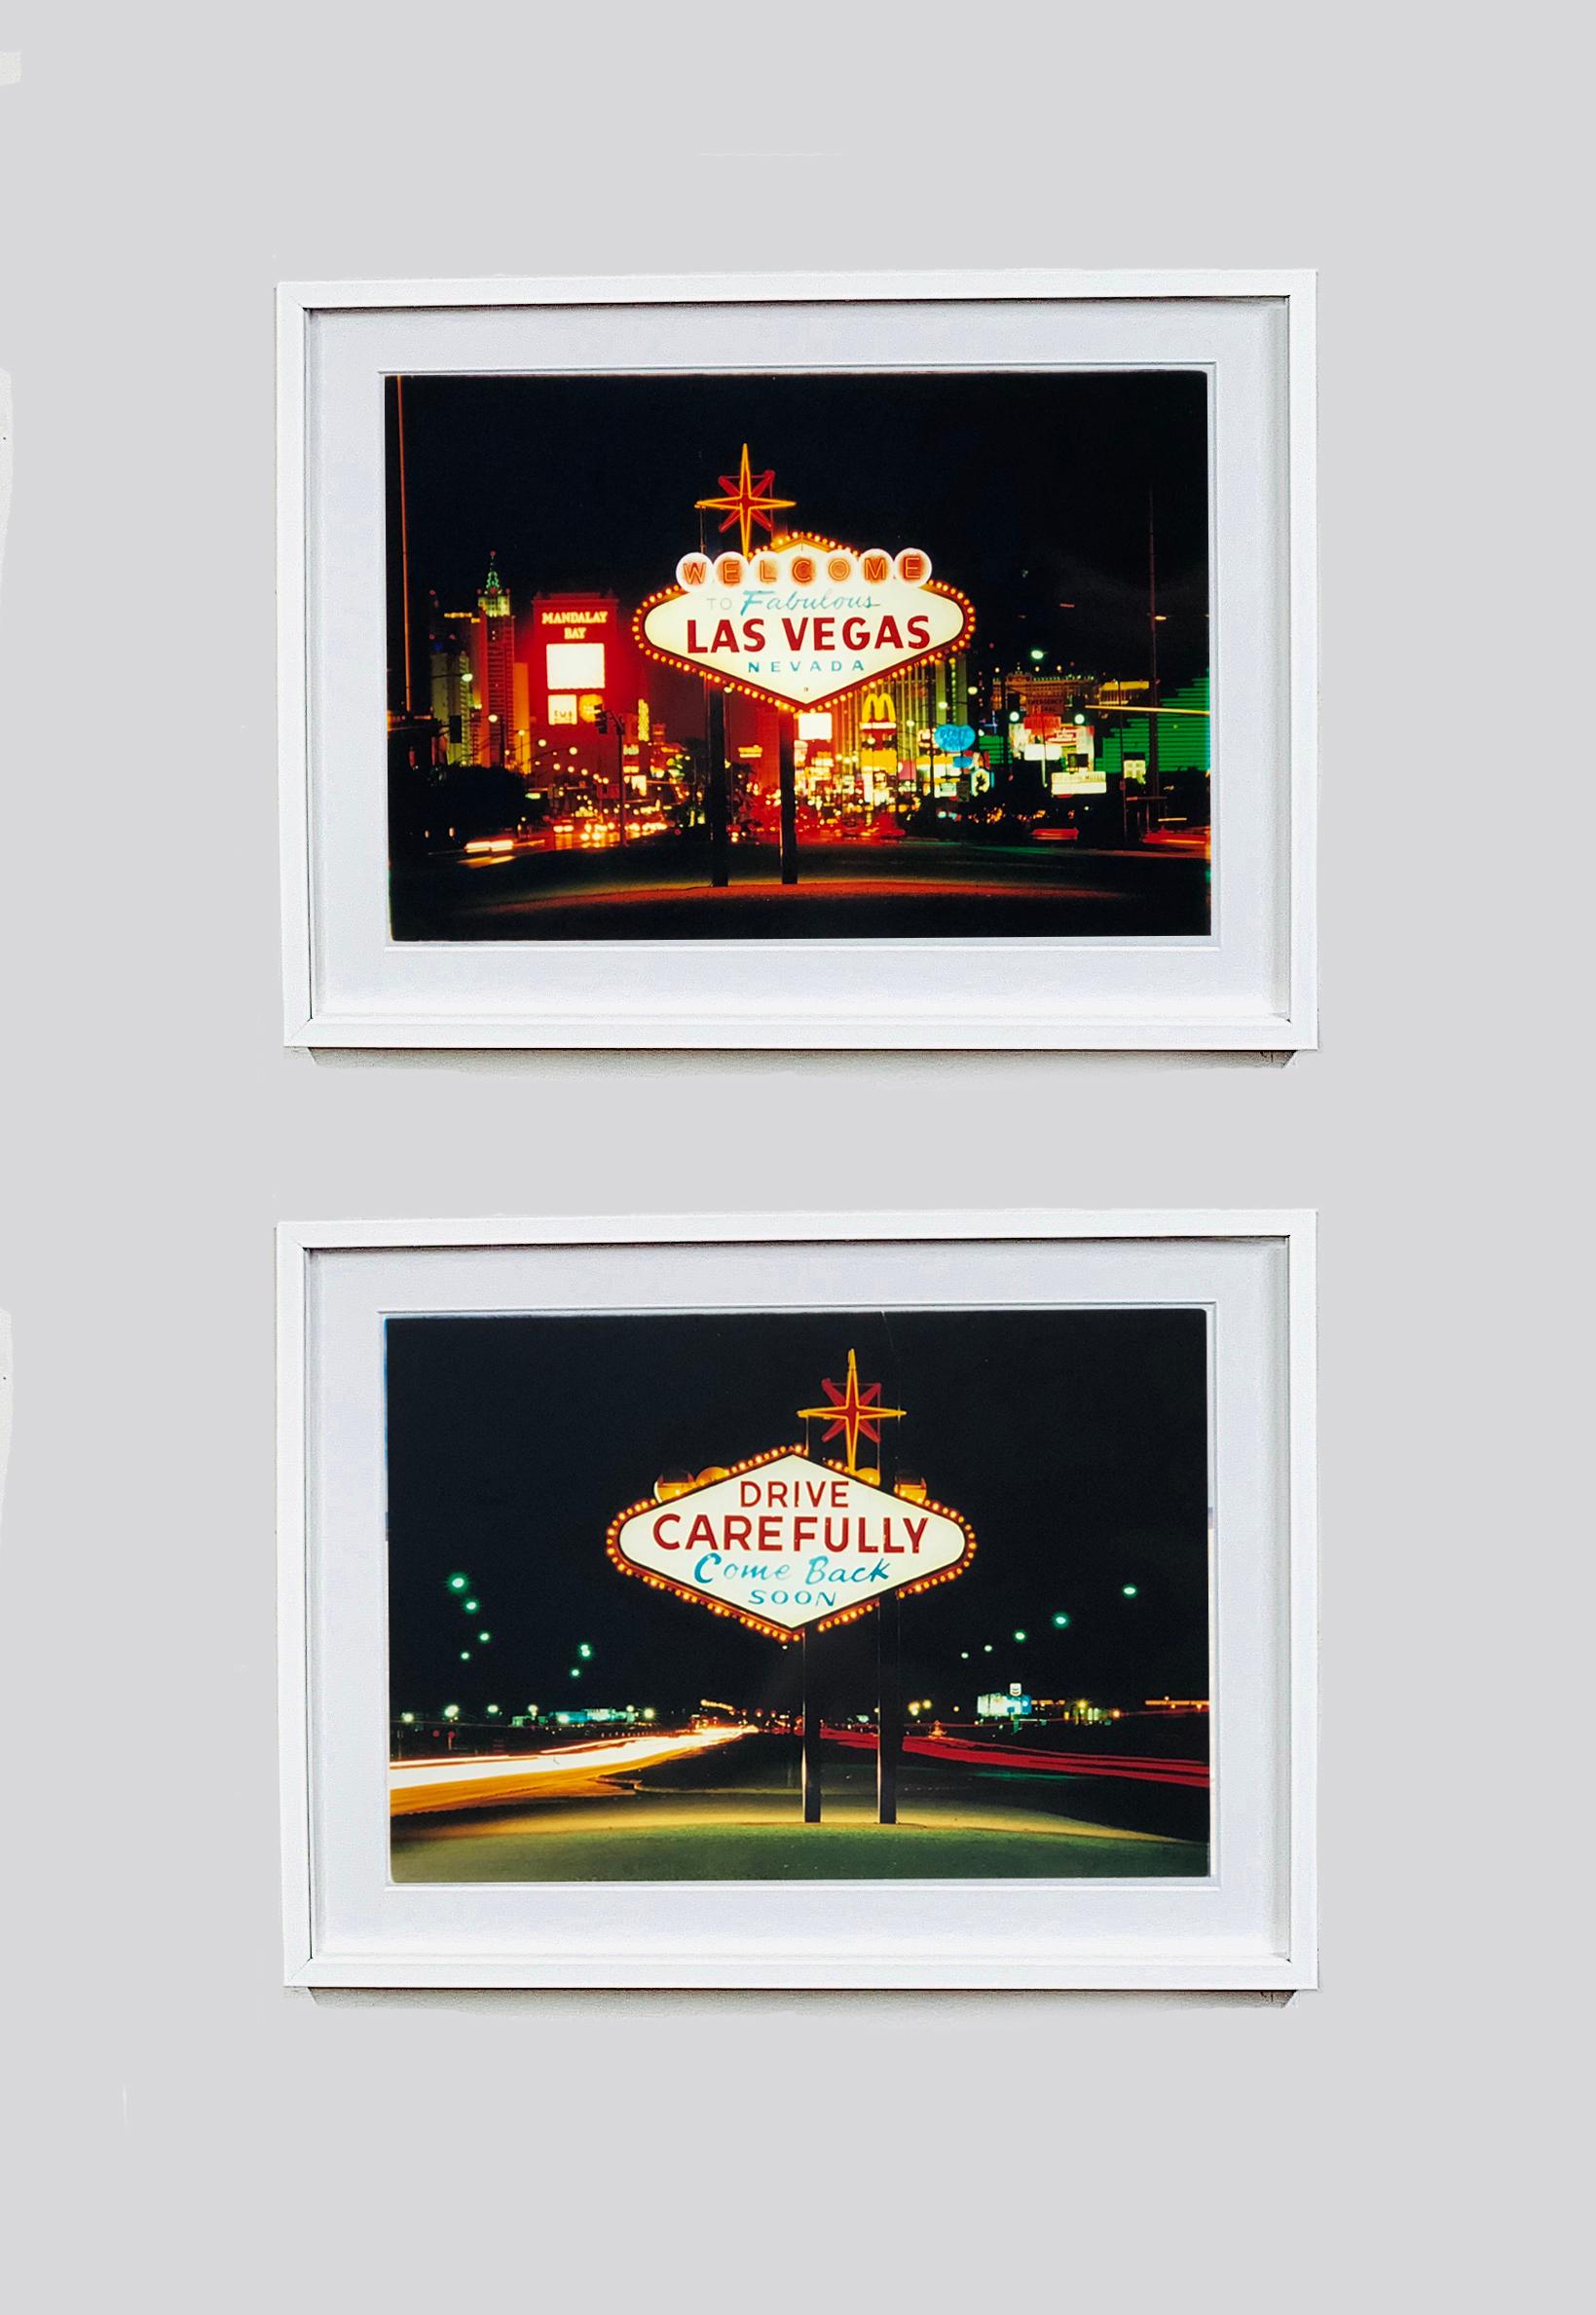 Taken upon leaving Las Vegas, photograph from Richard Heeps' 'Dream in Colour' series, this artwork captures a classic American neon Googie sign, with the famous Vegas cityscape in the background.  

This artwork is a limited edition of 25, gloss